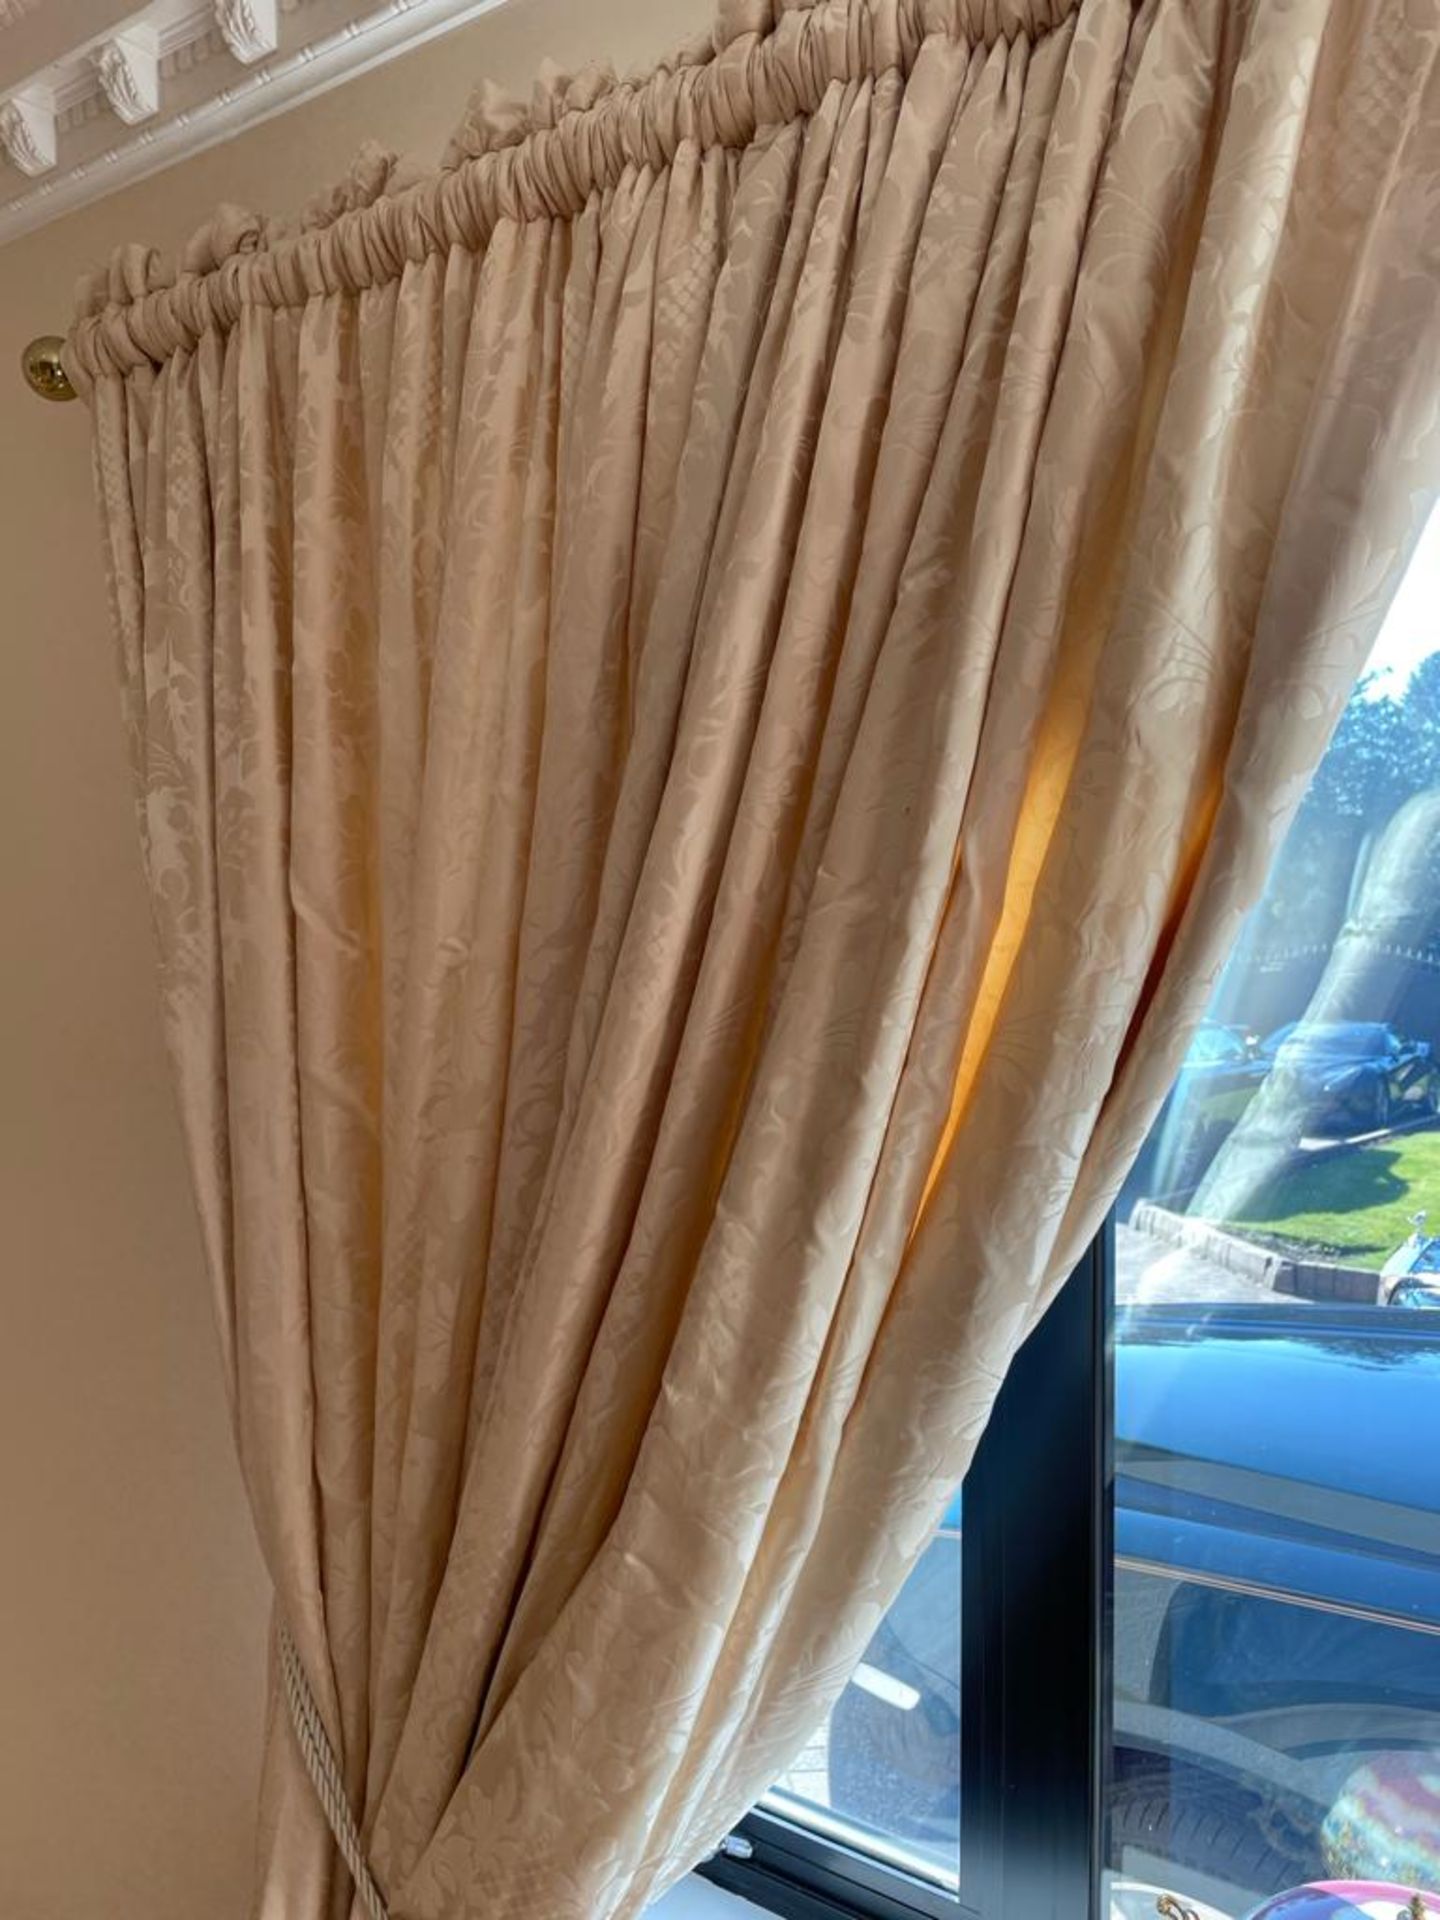 1 x Pair of Fabric Curtains With Blackout Liner and Brass Curtain Rail - Height 220 x Pole Length - Image 3 of 6